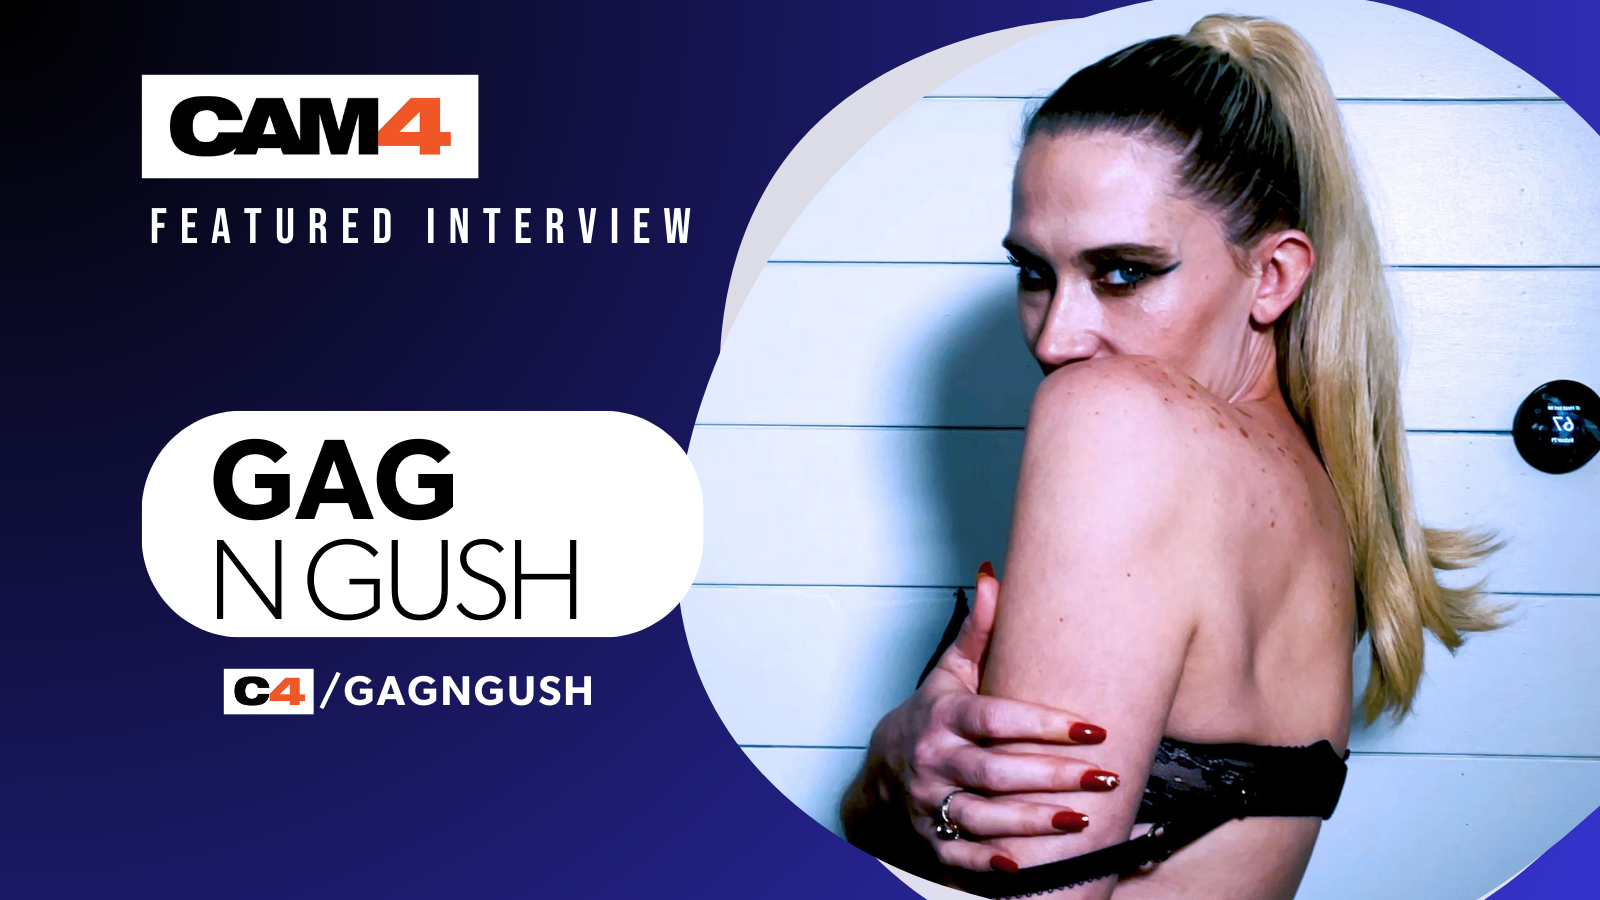 The Realistic Girlfriend Experience: GagNGush Invites You to See What You’re Missing